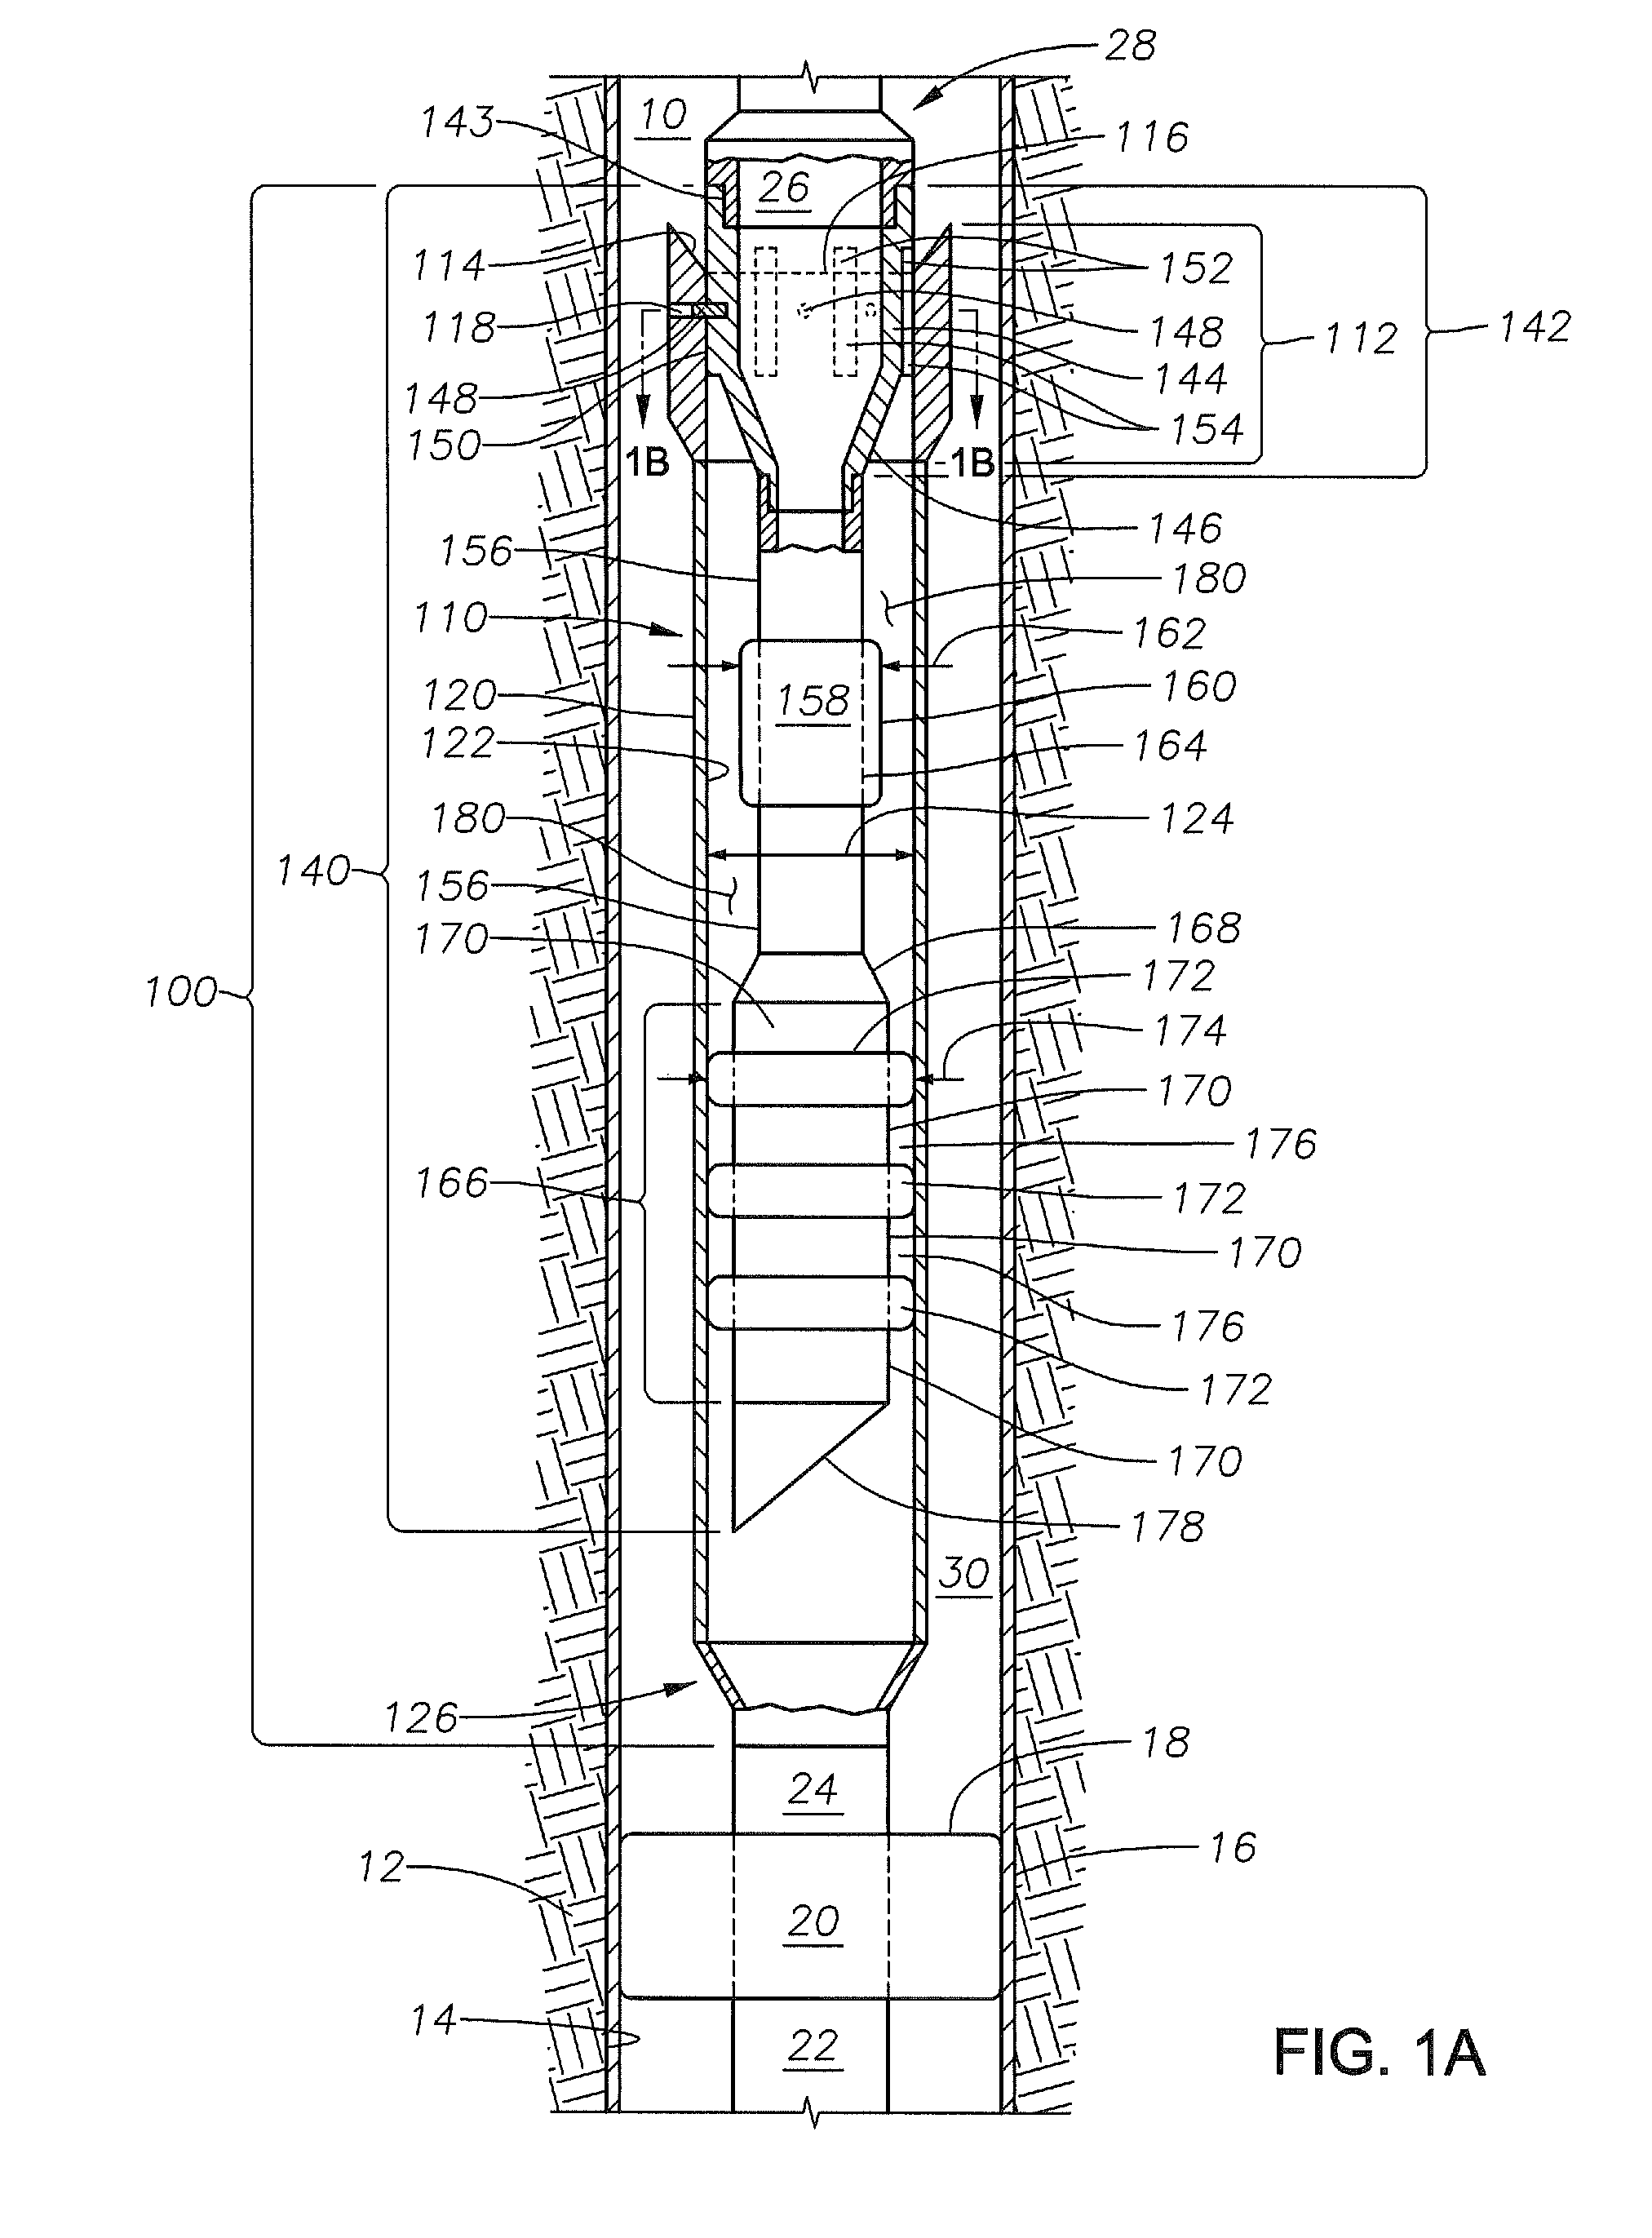 Apparatus and method for preventing tubing casing annulus pressure communication